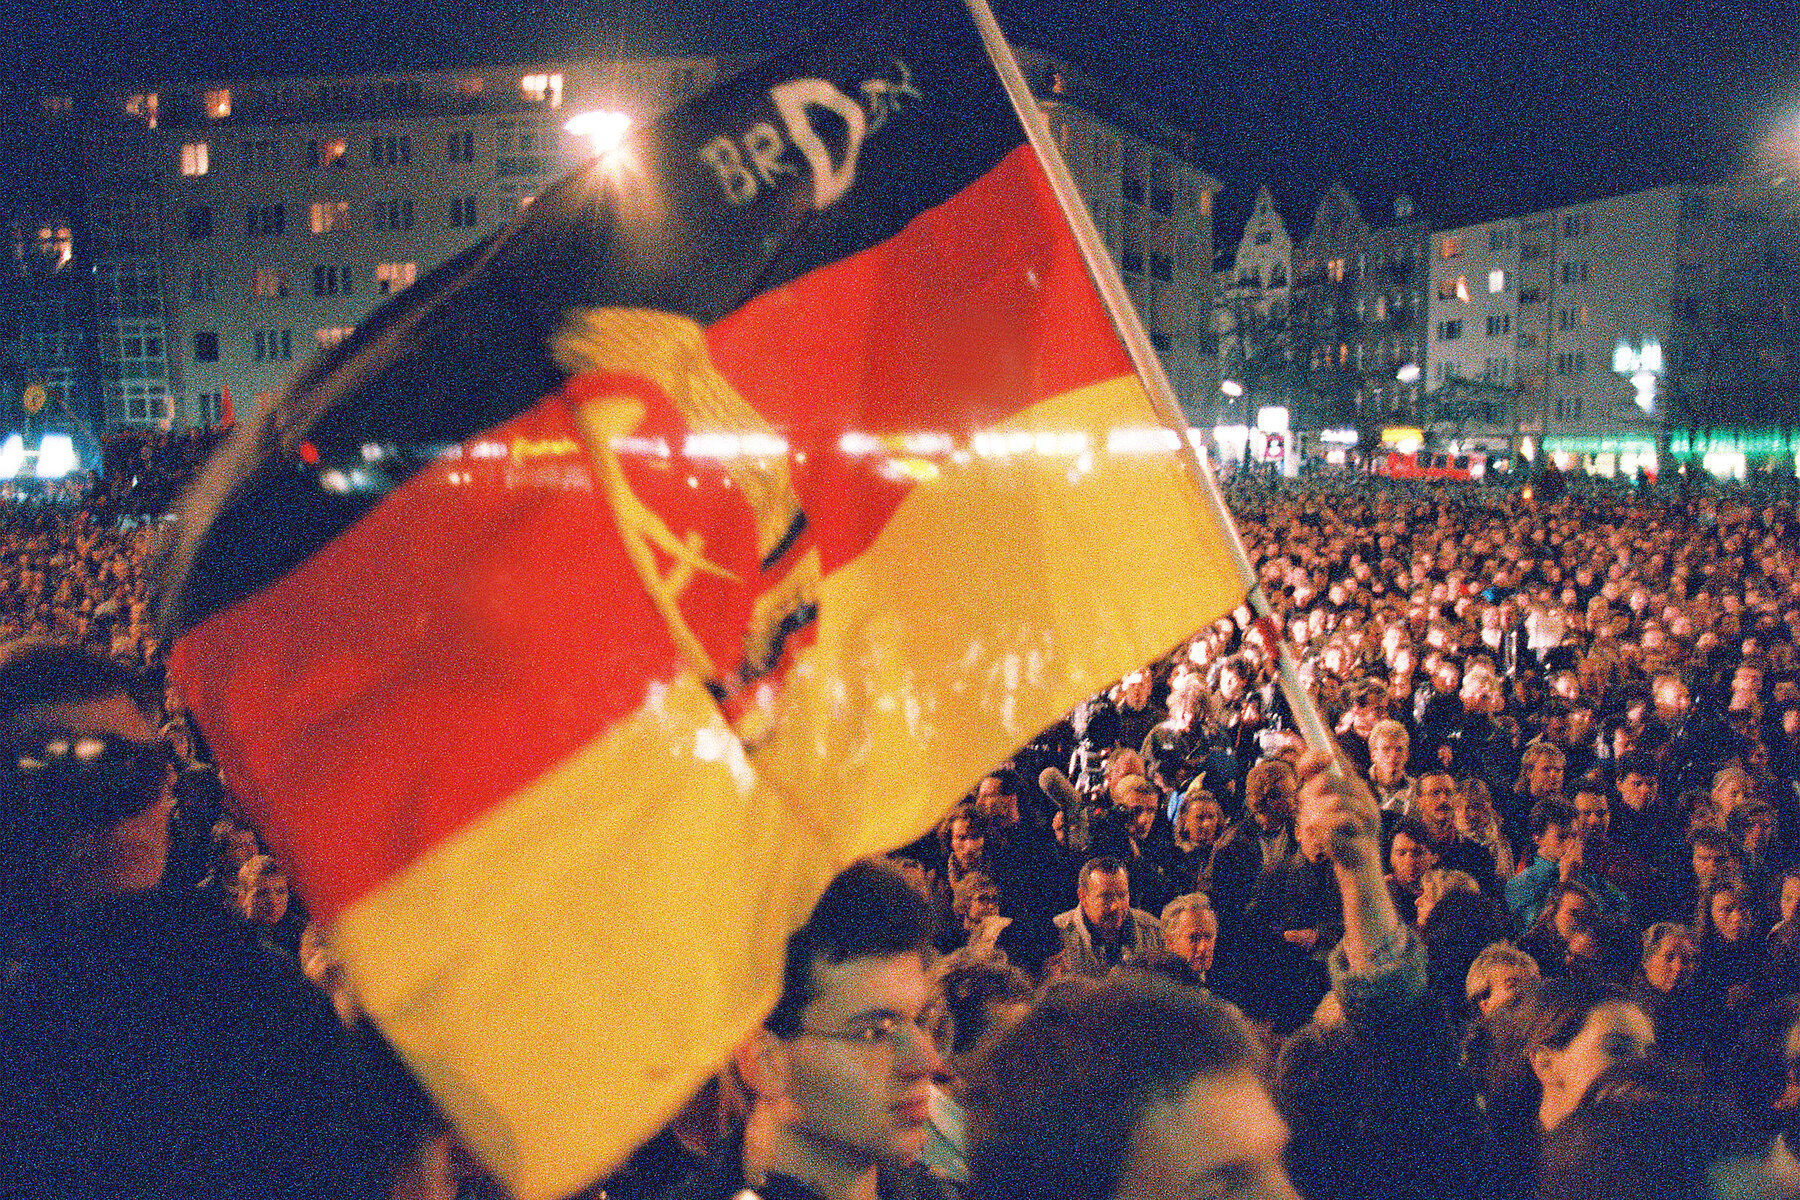 A huge crowd of people in front of Rathaus Schöneberg. In the foreground a demonstrator waves a flag with half of the GDR's national emblem and the inscription FRGDR.